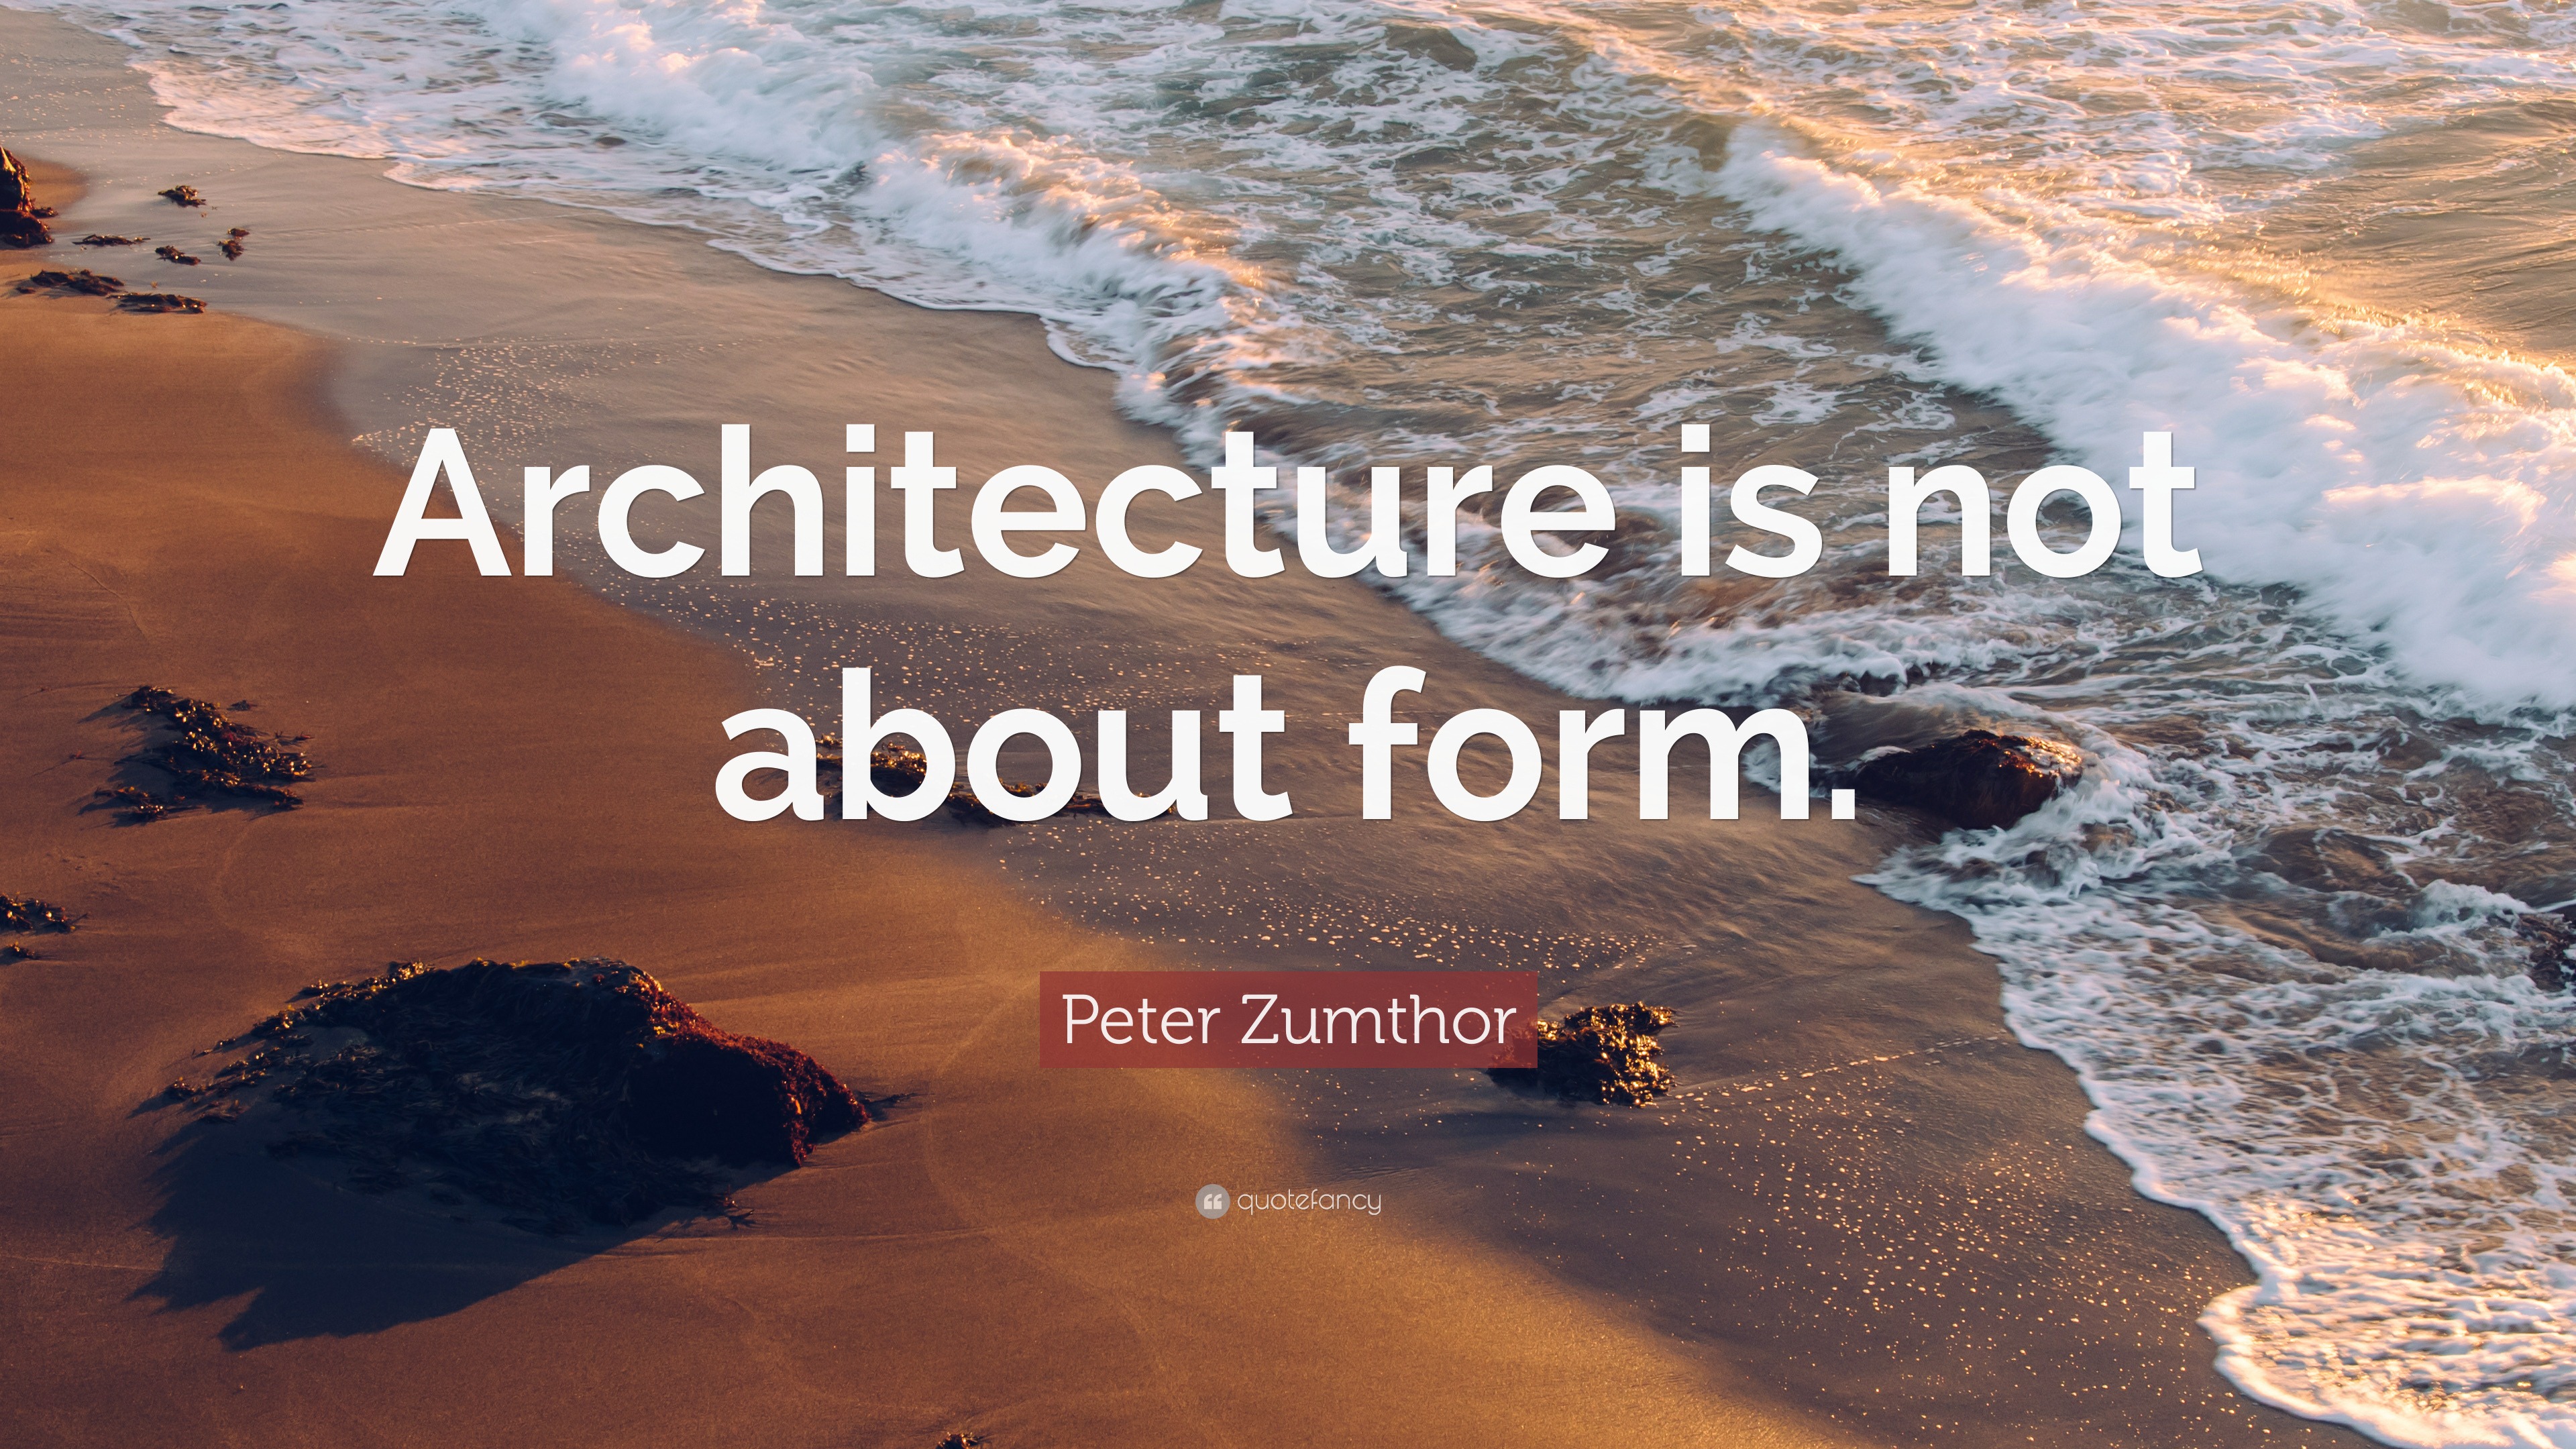 Peter Zumthor Quote: “Architecture is not about form.”